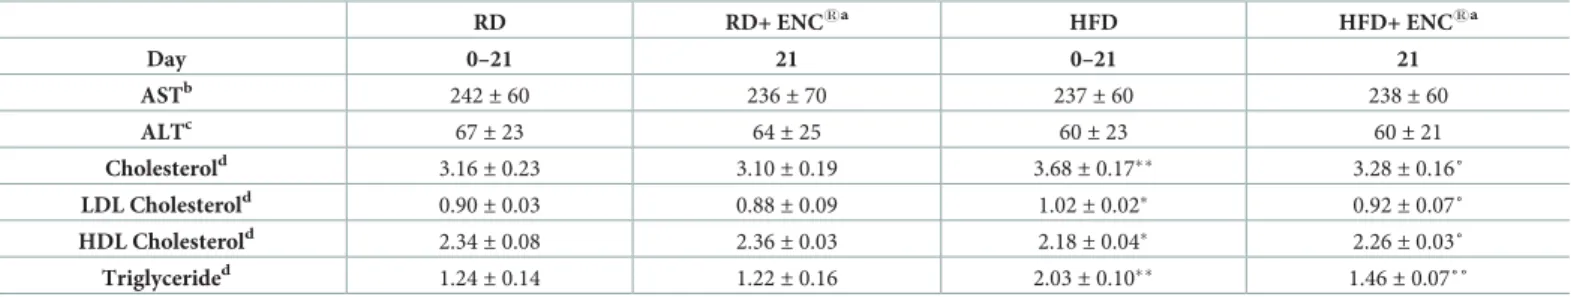 Table 1. Serum parameters of RD-rats and HFD-rats supplemented with or without ENC 1 for 21 days.